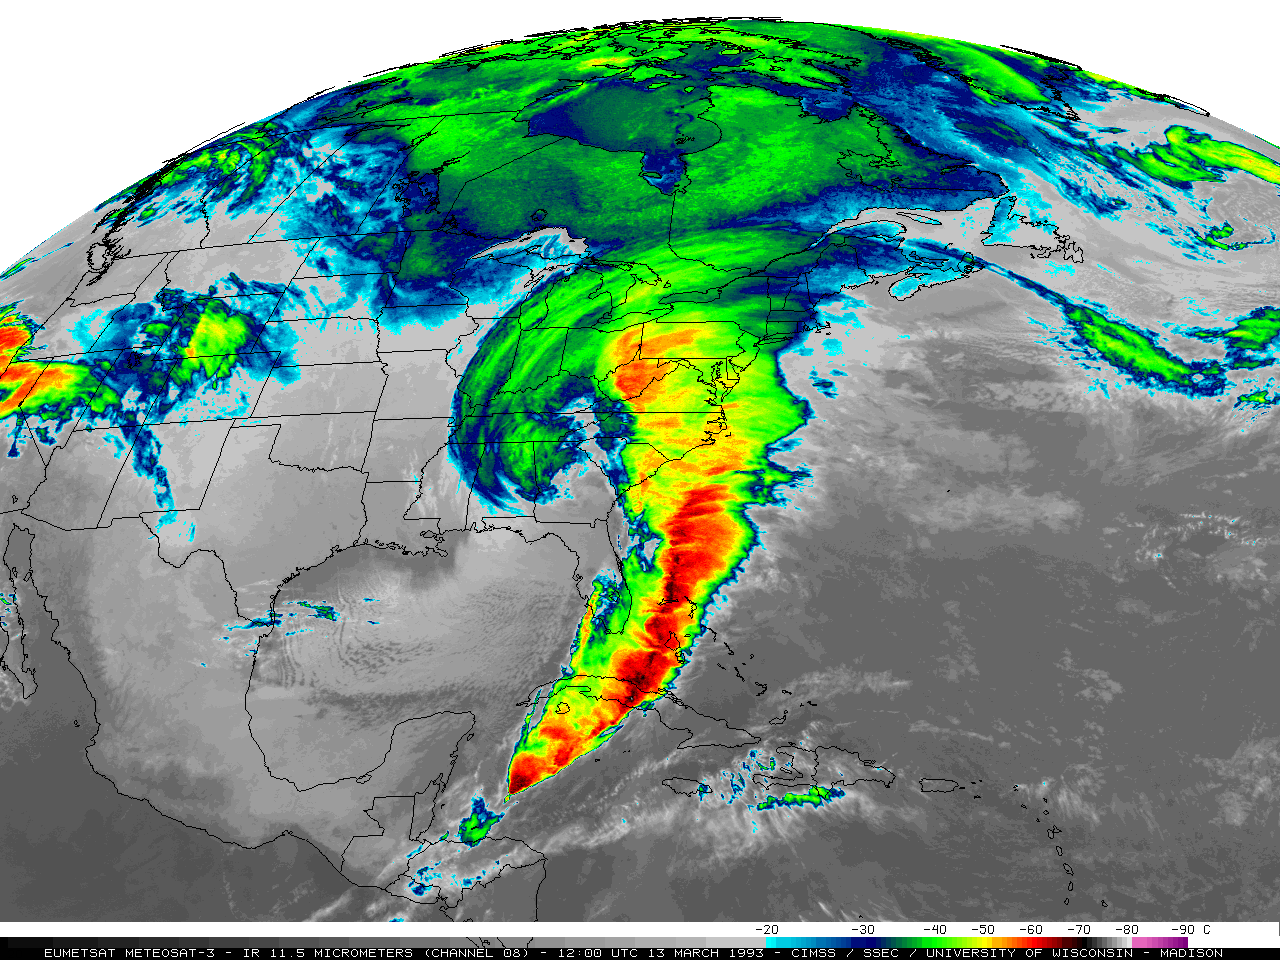 Meteosat-3 11.5 µm IR channel images (click image to play animation)